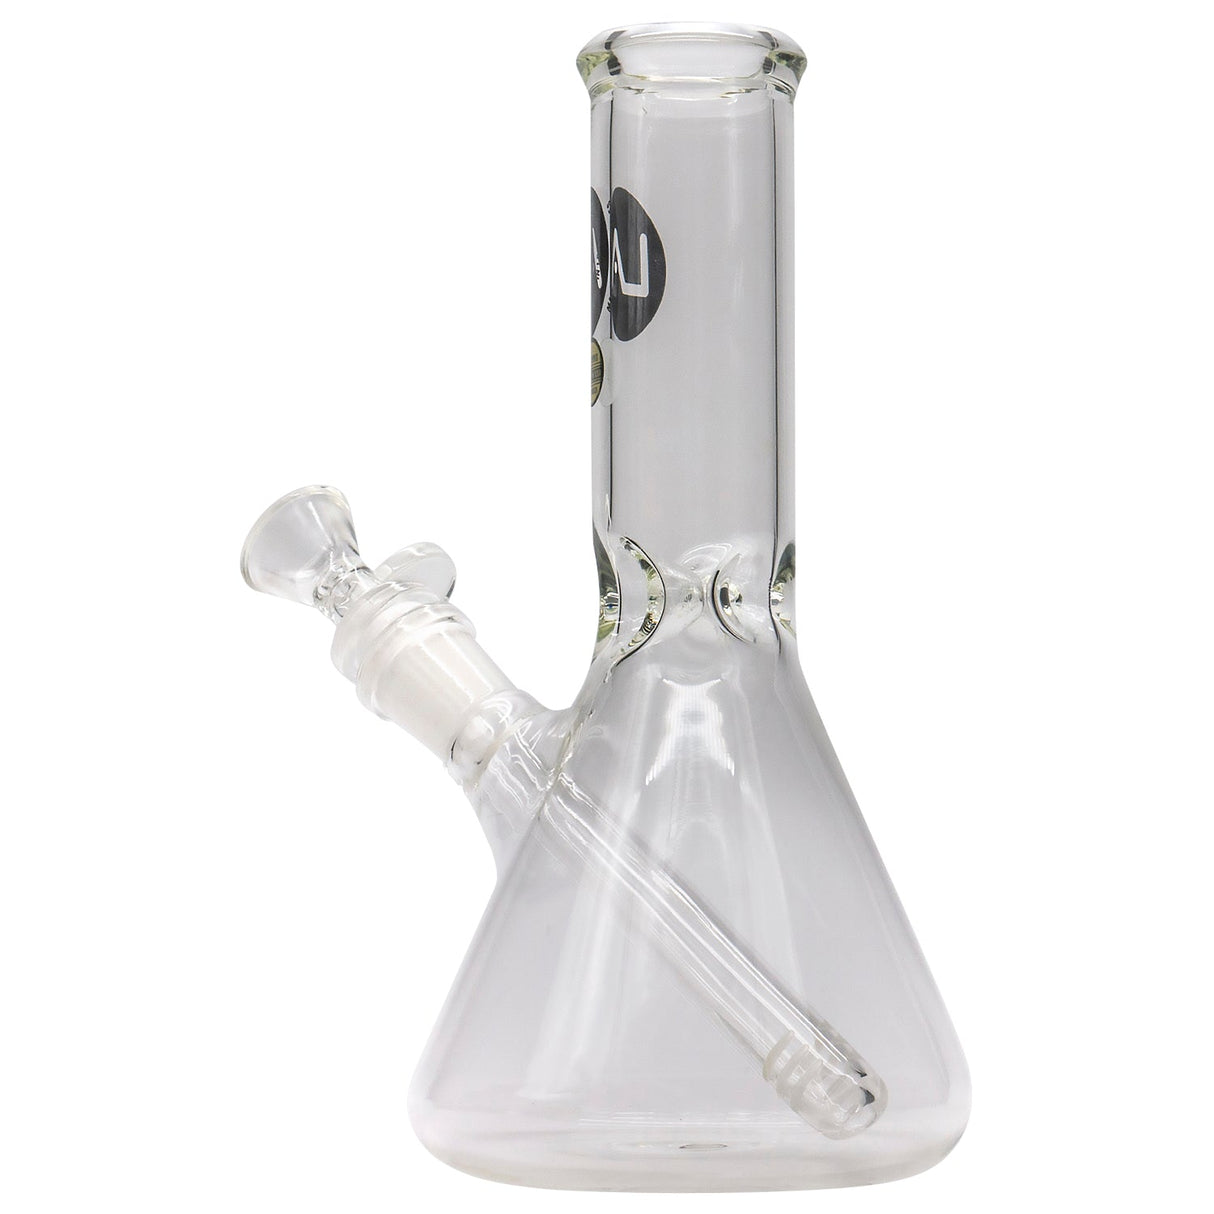 LA Pipes Basic Beaker Water Pipe, clear borosilicate glass, 8" tall, 45-degree joint, side view